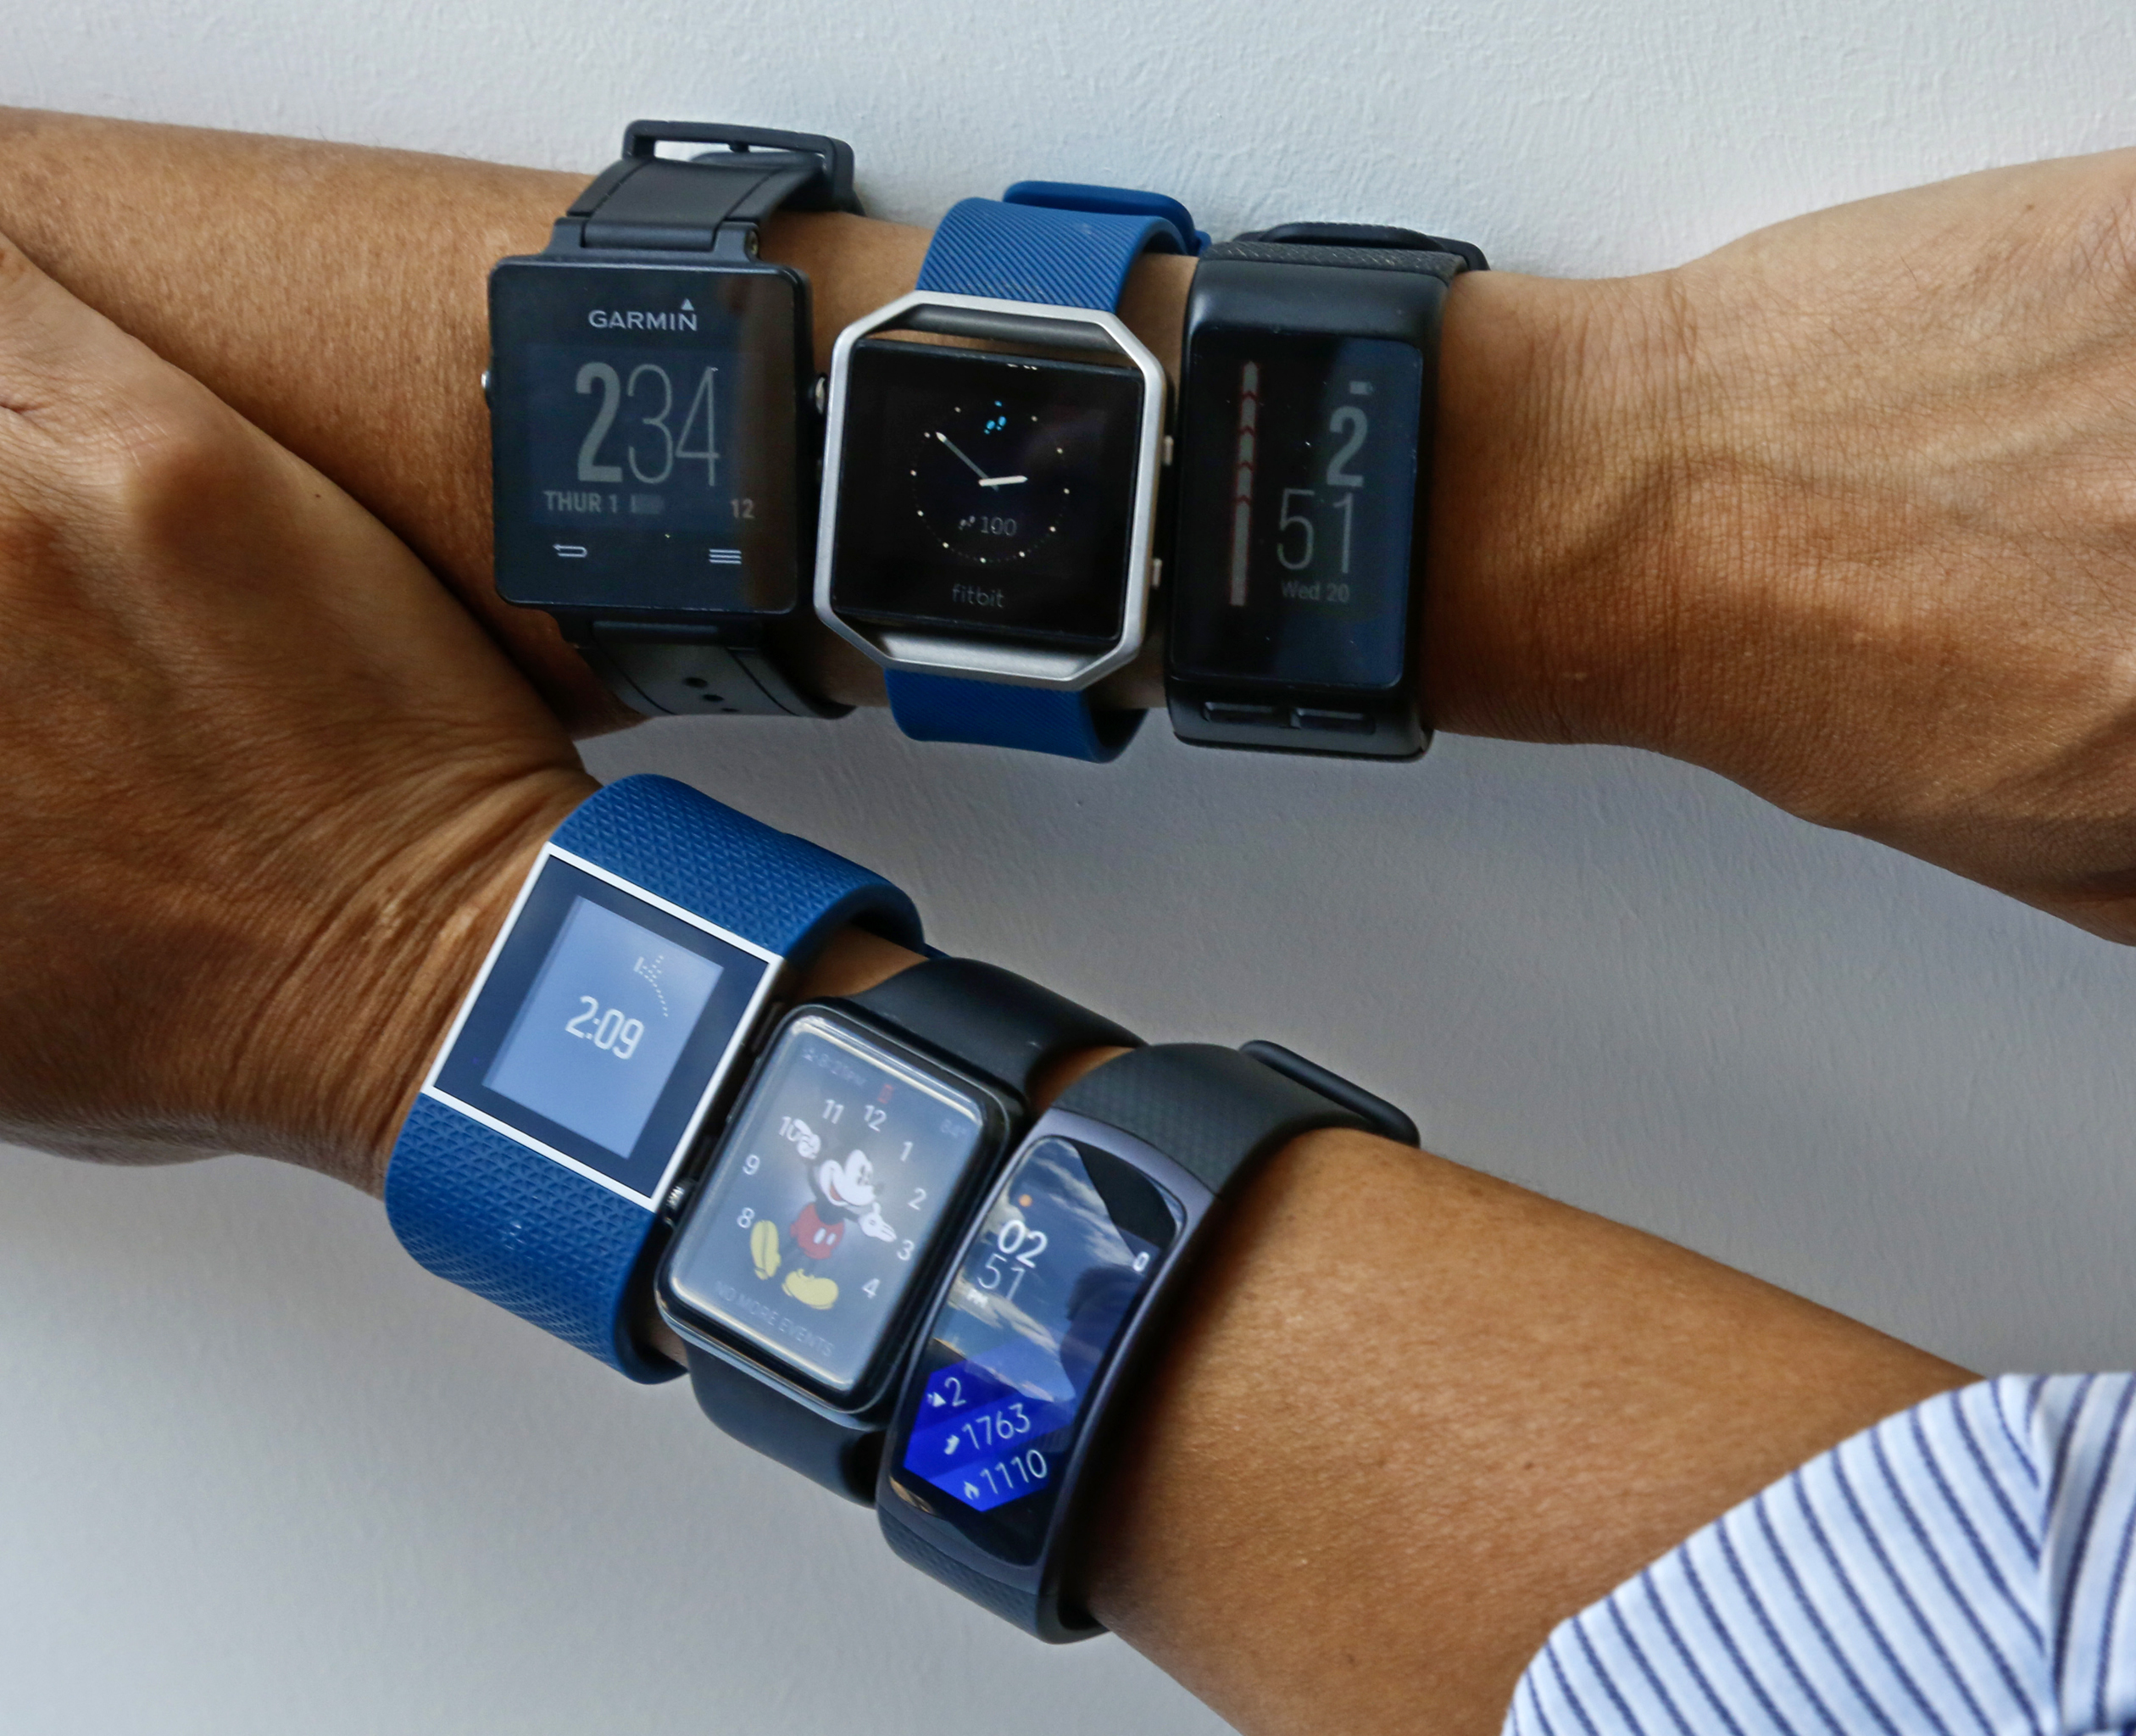 Two wrists display several different kinds of fitness tracker watches with their displays showing the time.